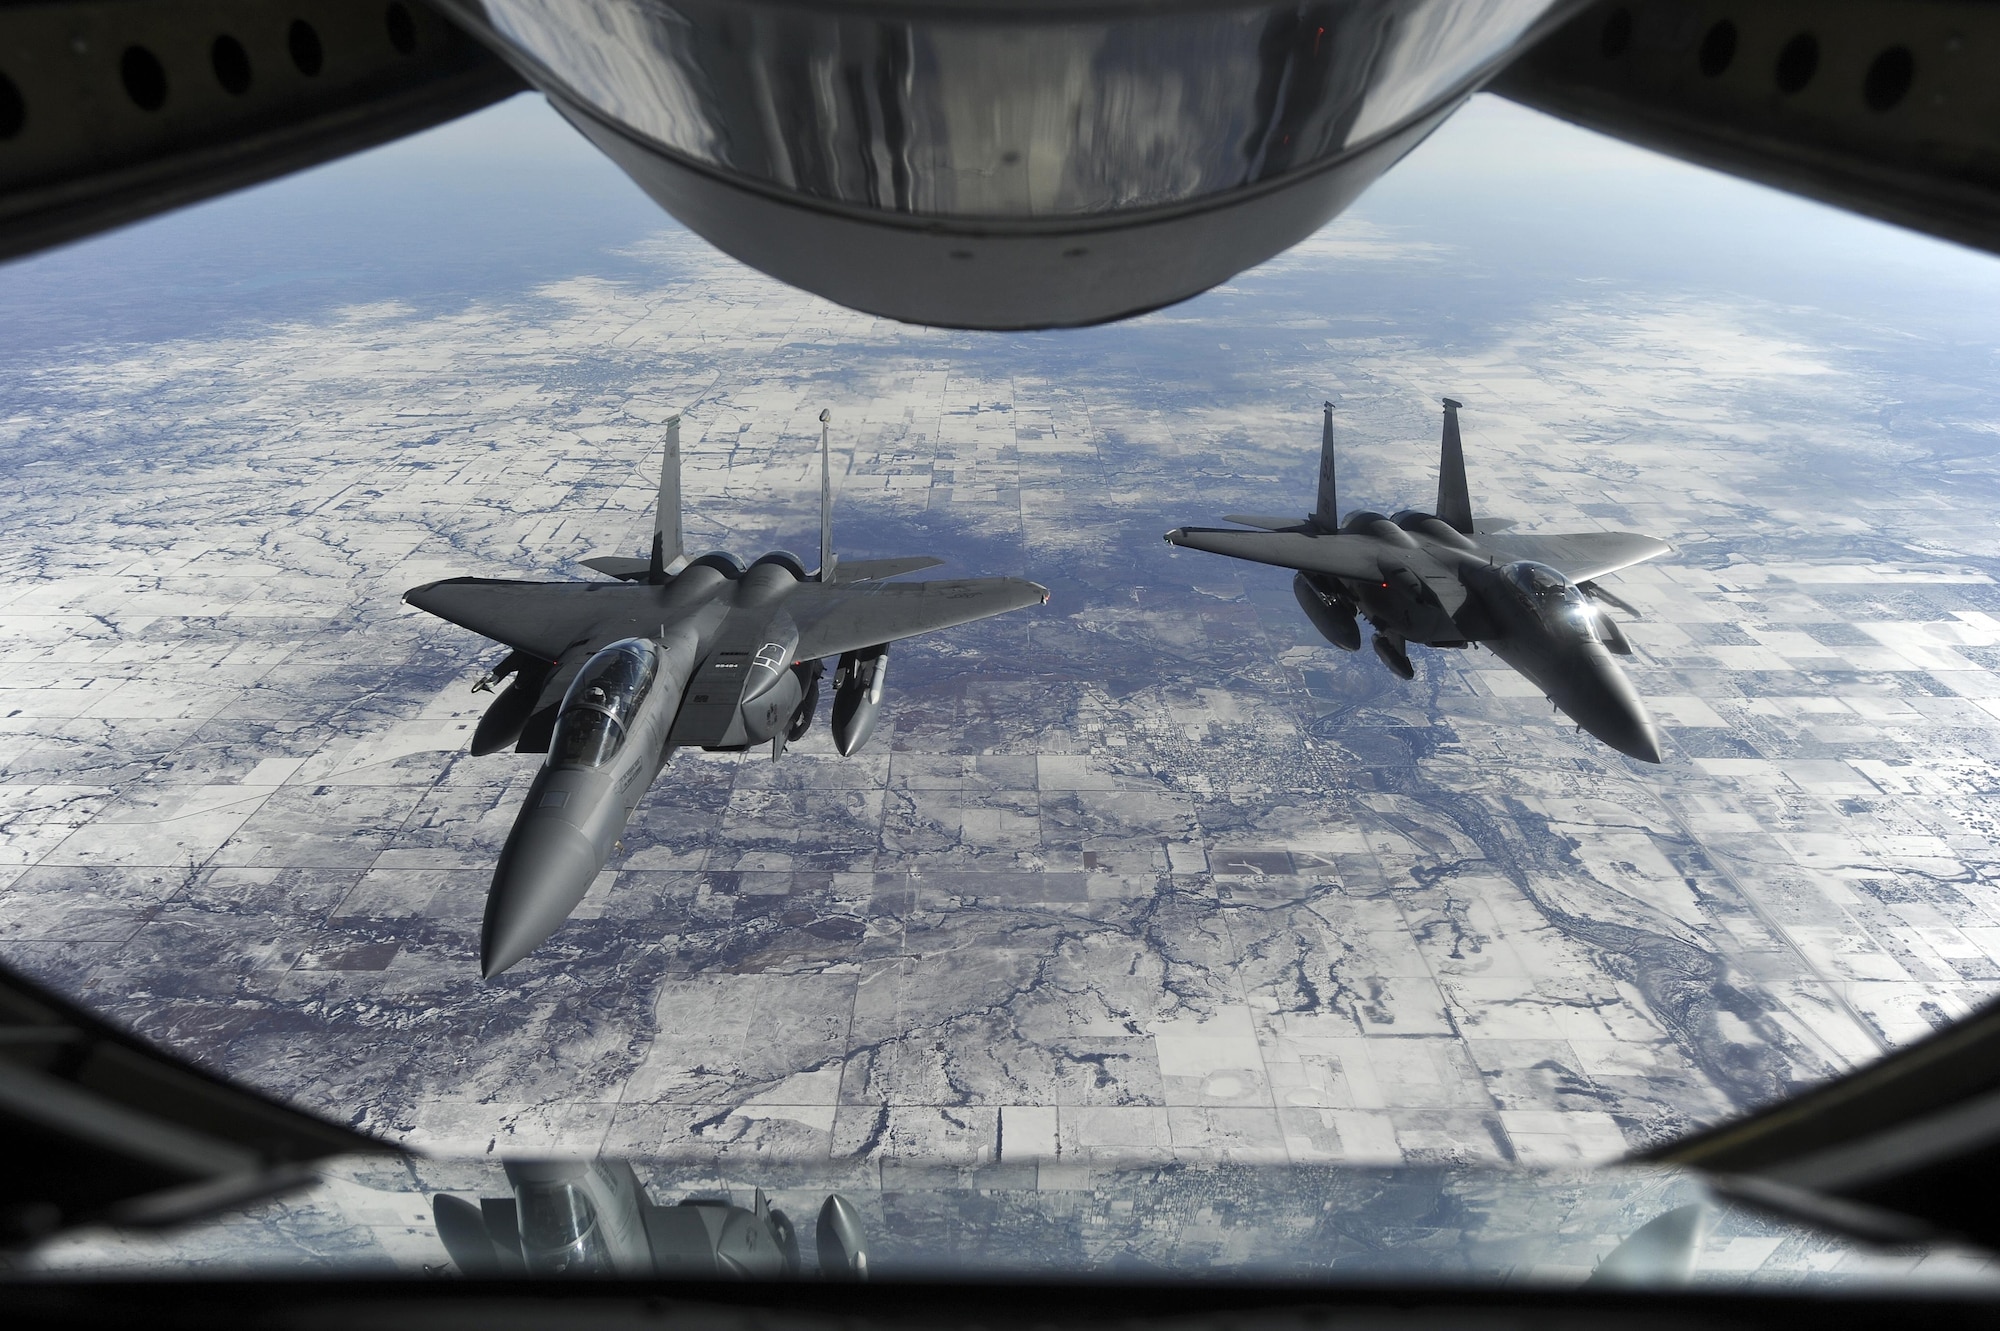 Two F-15E Strike Eagles wait to receive fuel from a KC-135R Stratotanker Jan. 23, 2015, on their way to Nellis Air Force Base, Nev., in support of Red Flag 15-1. The exercise, featuring aircraft from 21 Air Force squadrons, offers realistic combat training involving the air, space and cyber forces of the U.S. and its allies. The F-15s are assigned to the 4th Fighter Wing and the KC-135R is assigned to the 916th Air Refueling Wing. (U.S. Air Force photo/Airman 1st Class Aaron J. Jenne)